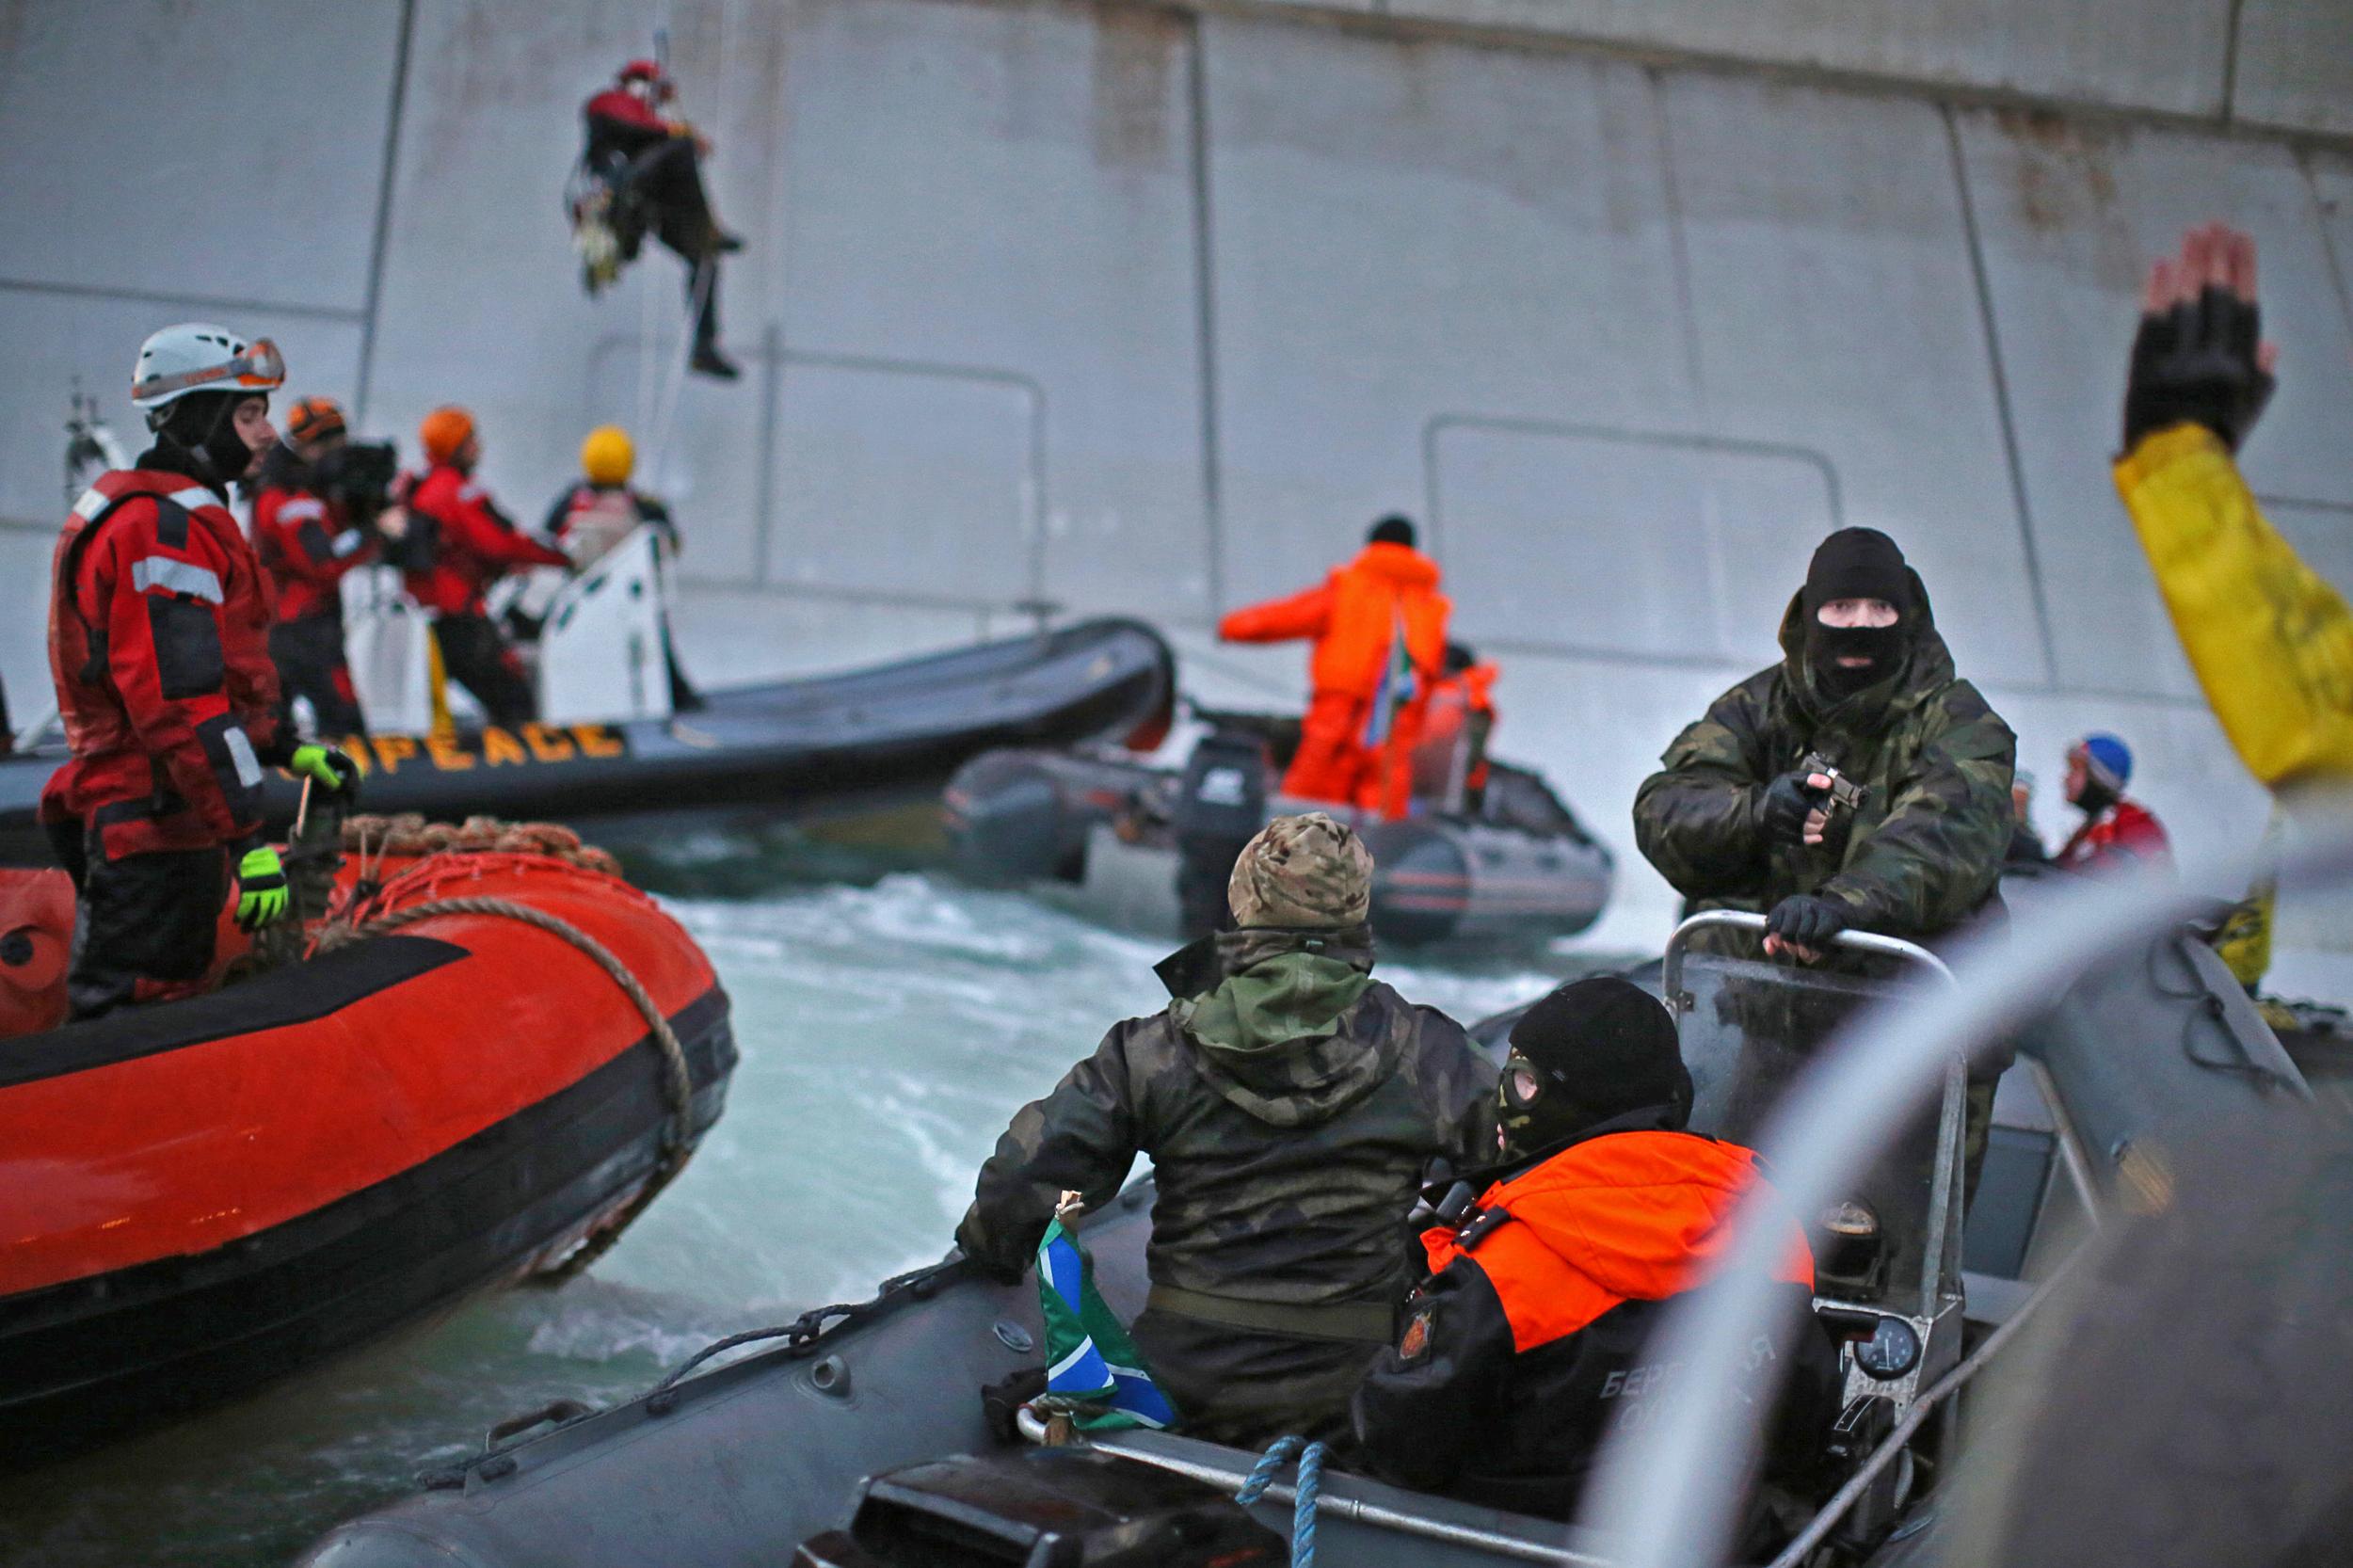 A man standing in a small boat in a black balaclava and camoflage jacket points a gun at someone just off-camera. Their hand can be seen raised in the air. In the background, more boats mill around, and a person is abseiling down the side of a large metal structure into a boat.